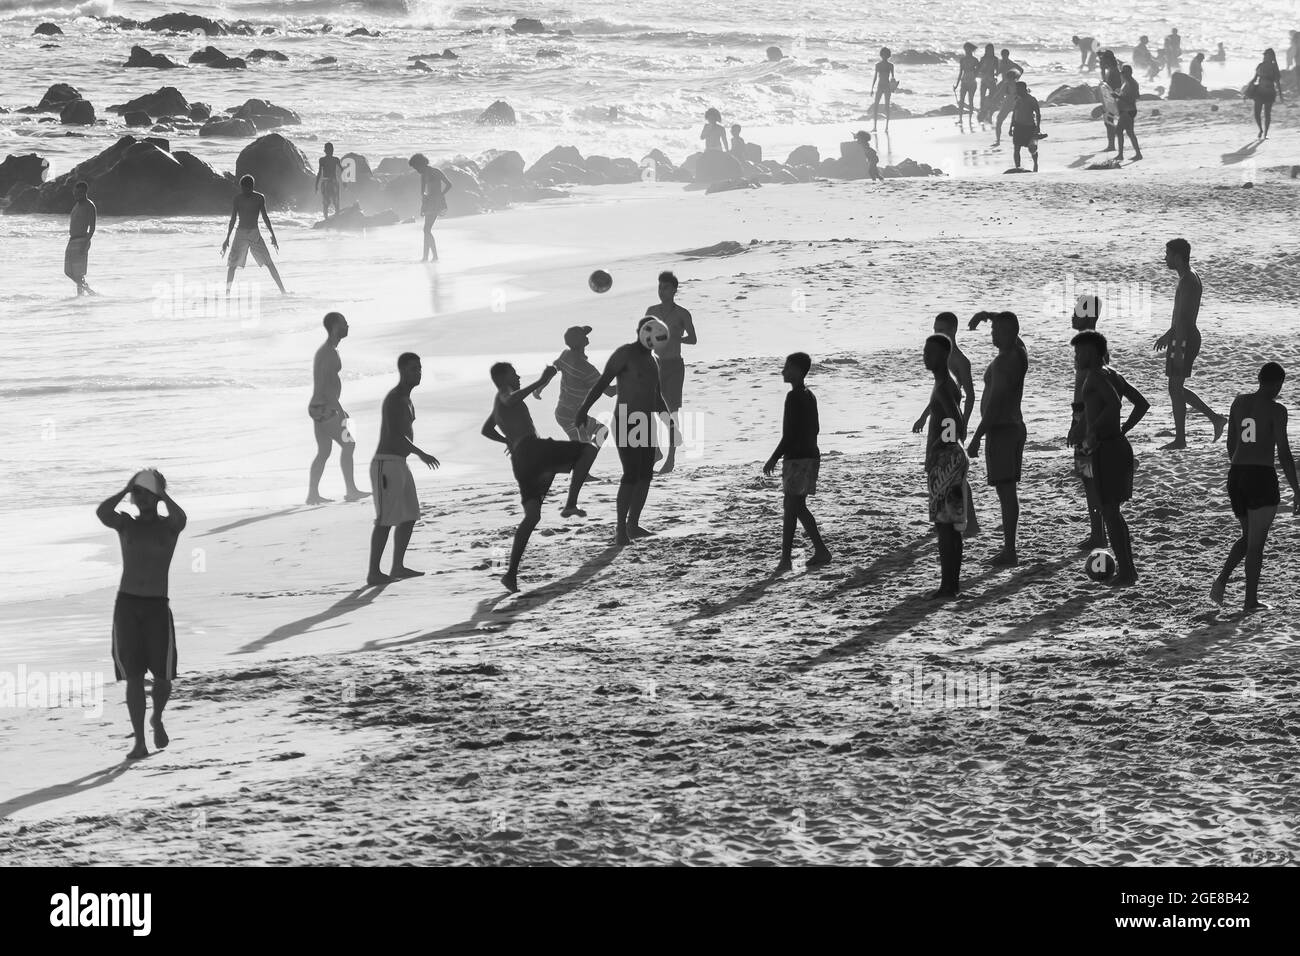 Salvador, Bahia, Brazil - January 05, 2019: Young people on the beach playing sand soccer in the middle of the coronavirus pandemic. Stock Photo